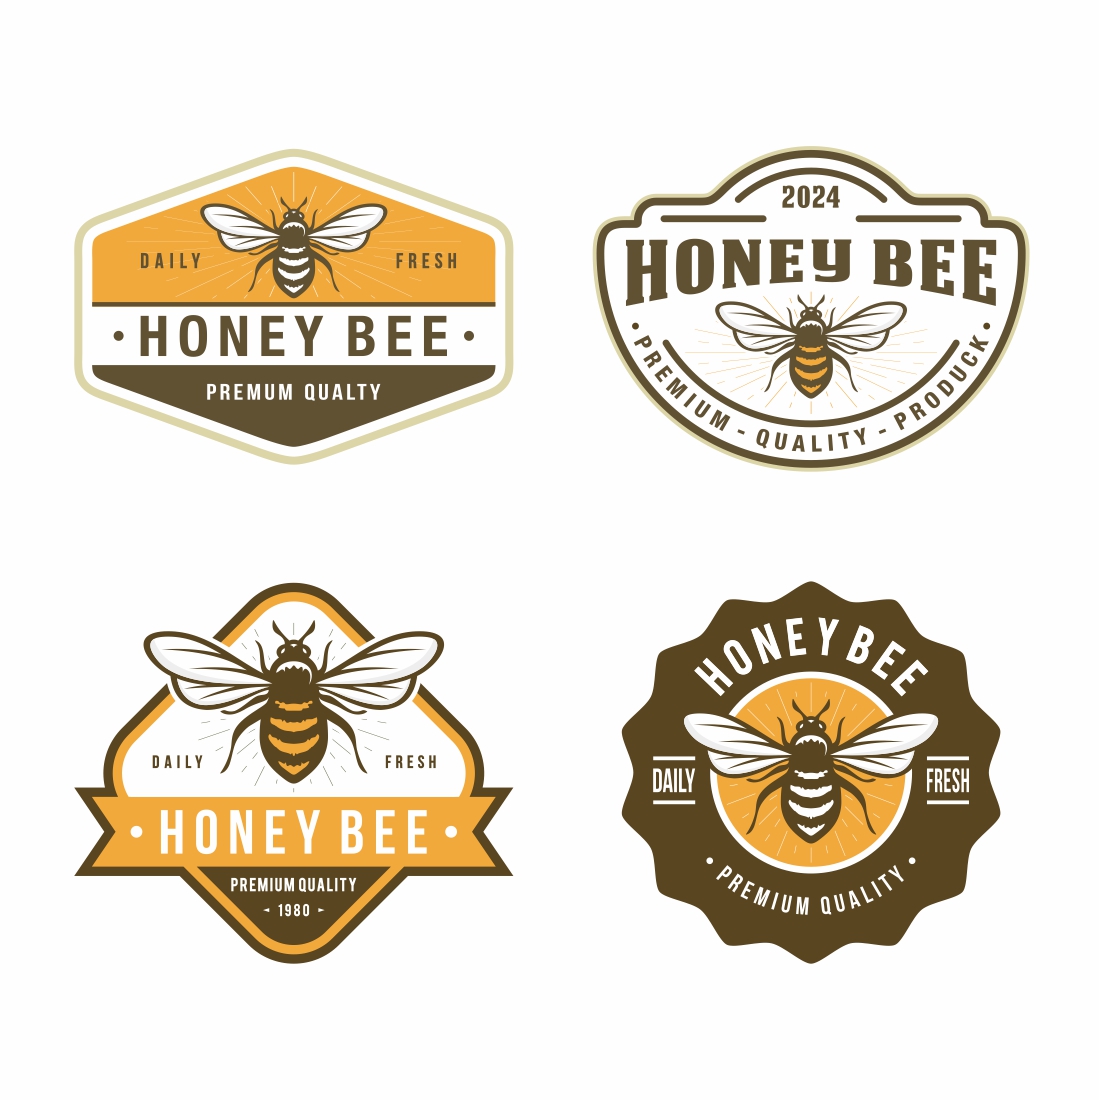 Fresh Honey Bee logo design collection - only 9$ preview image.